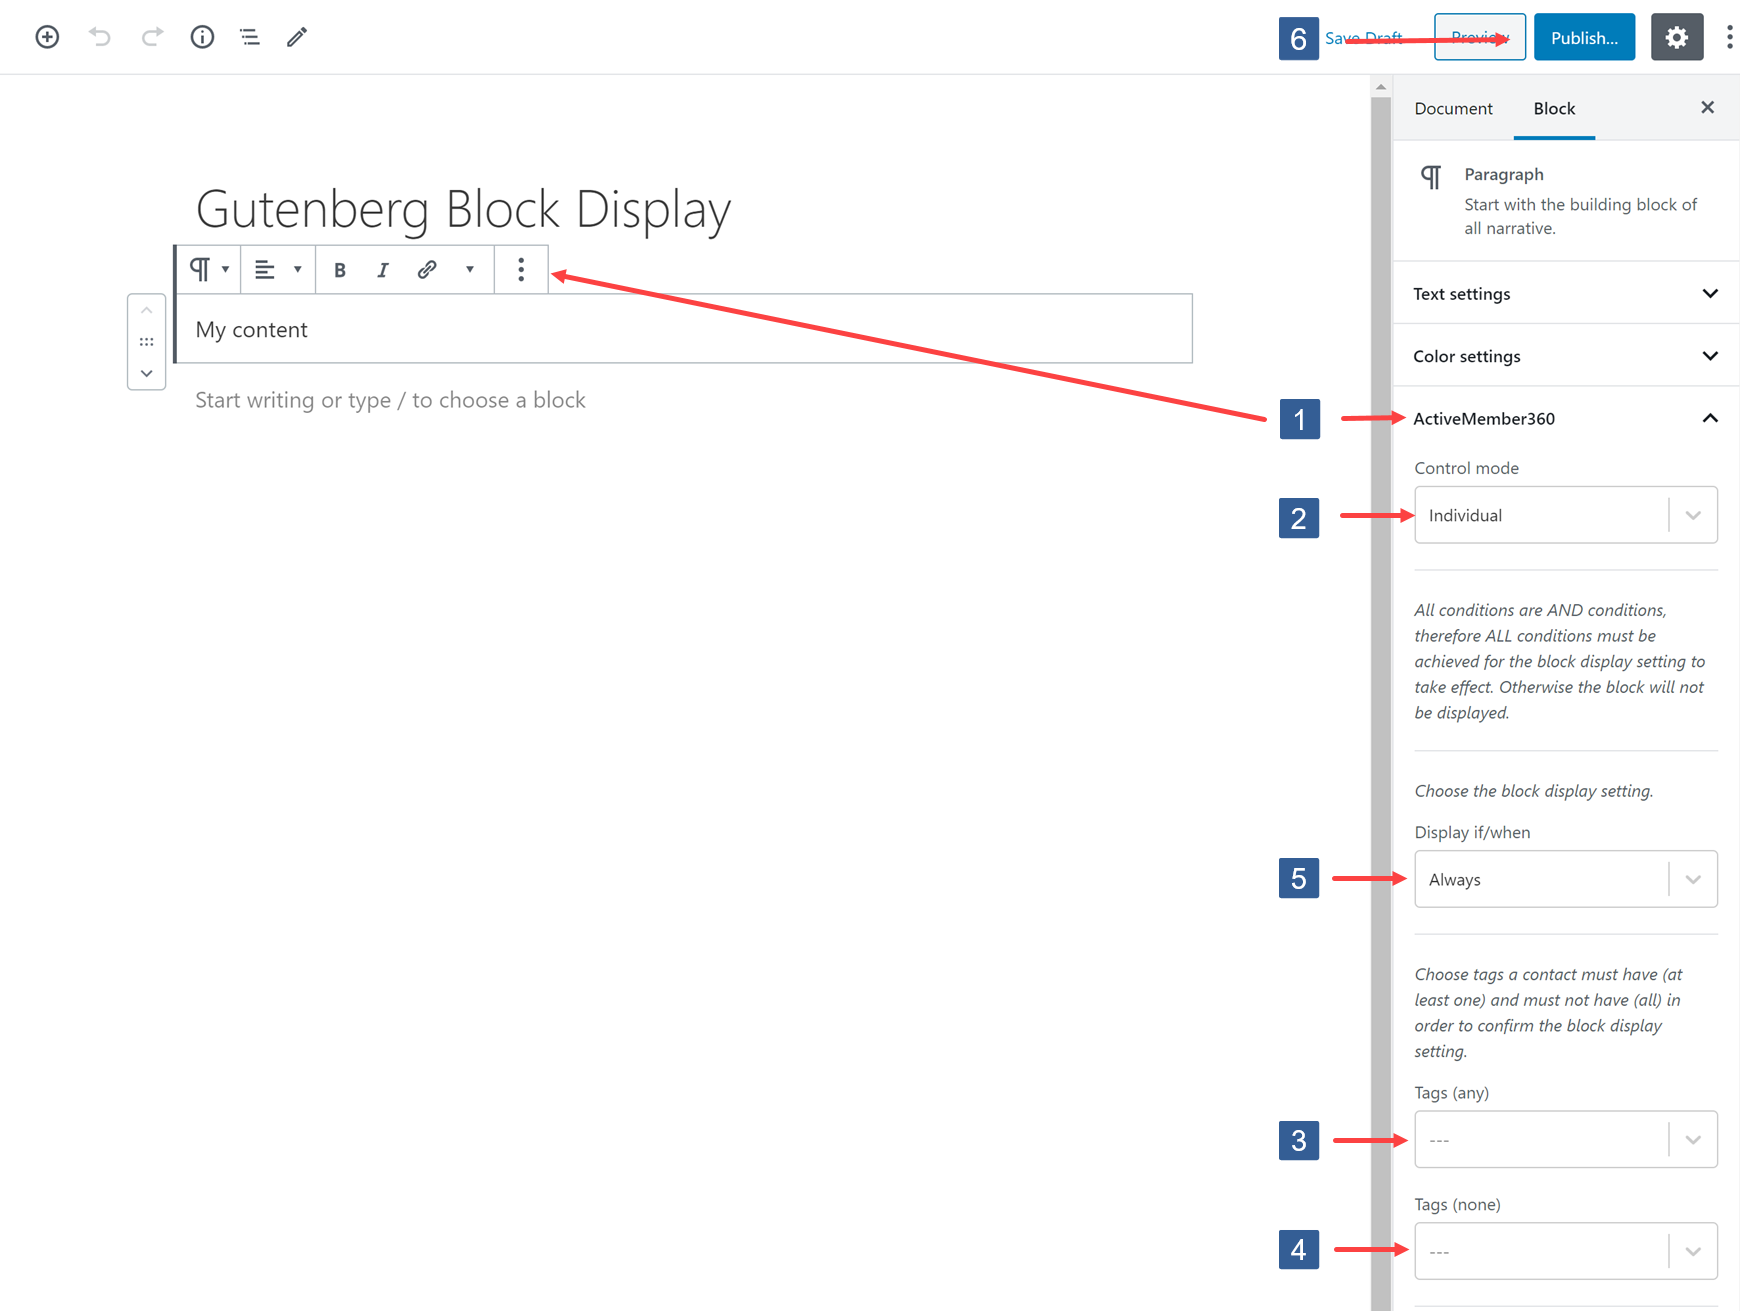 Specifying visibility conditions for Gutenberg block based upon contact tags